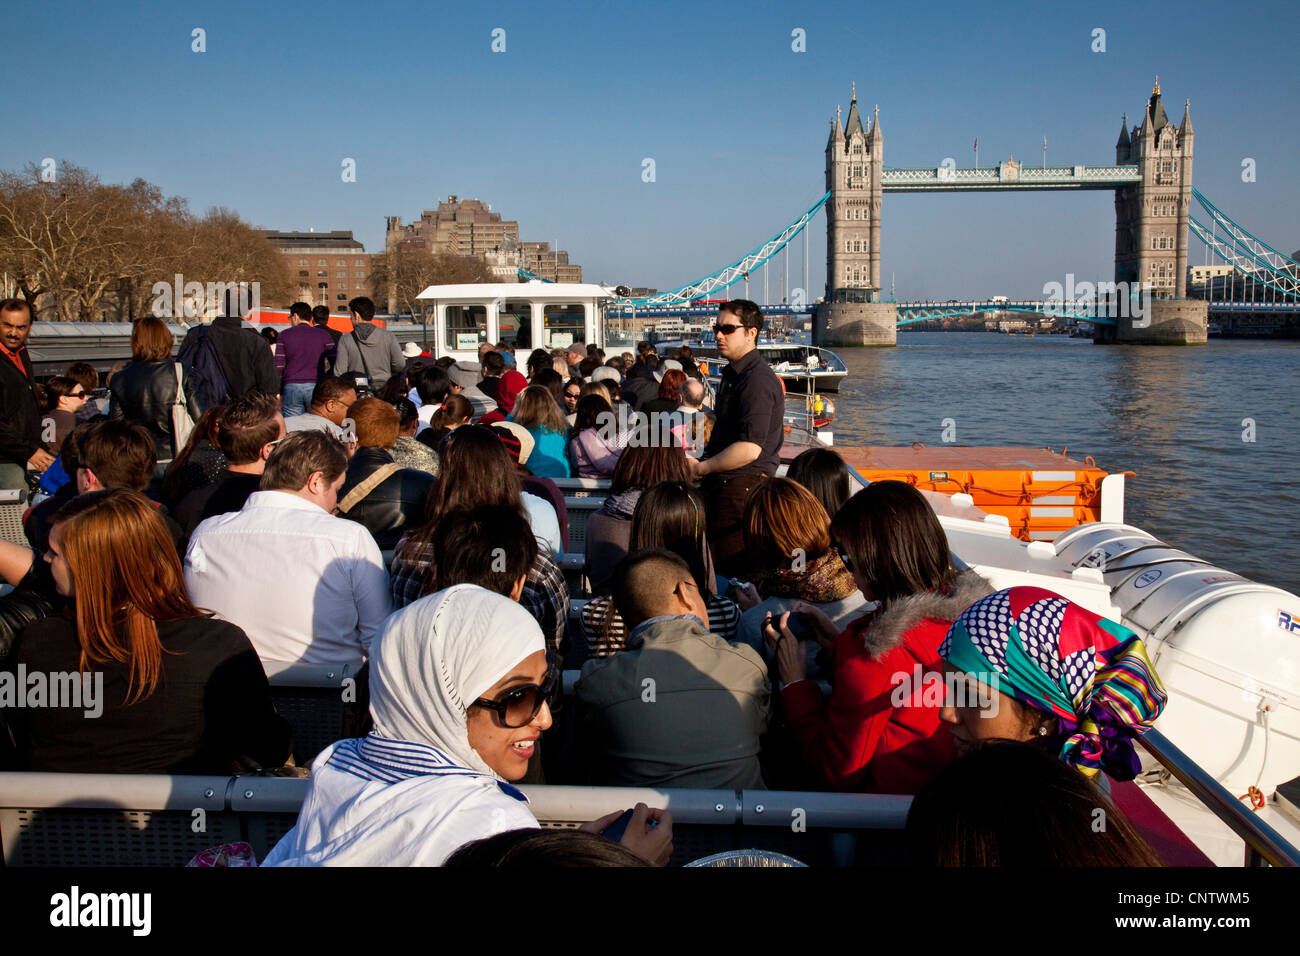 Tourists on a City Cruise Boat, River Thames, London, England Stock Photo